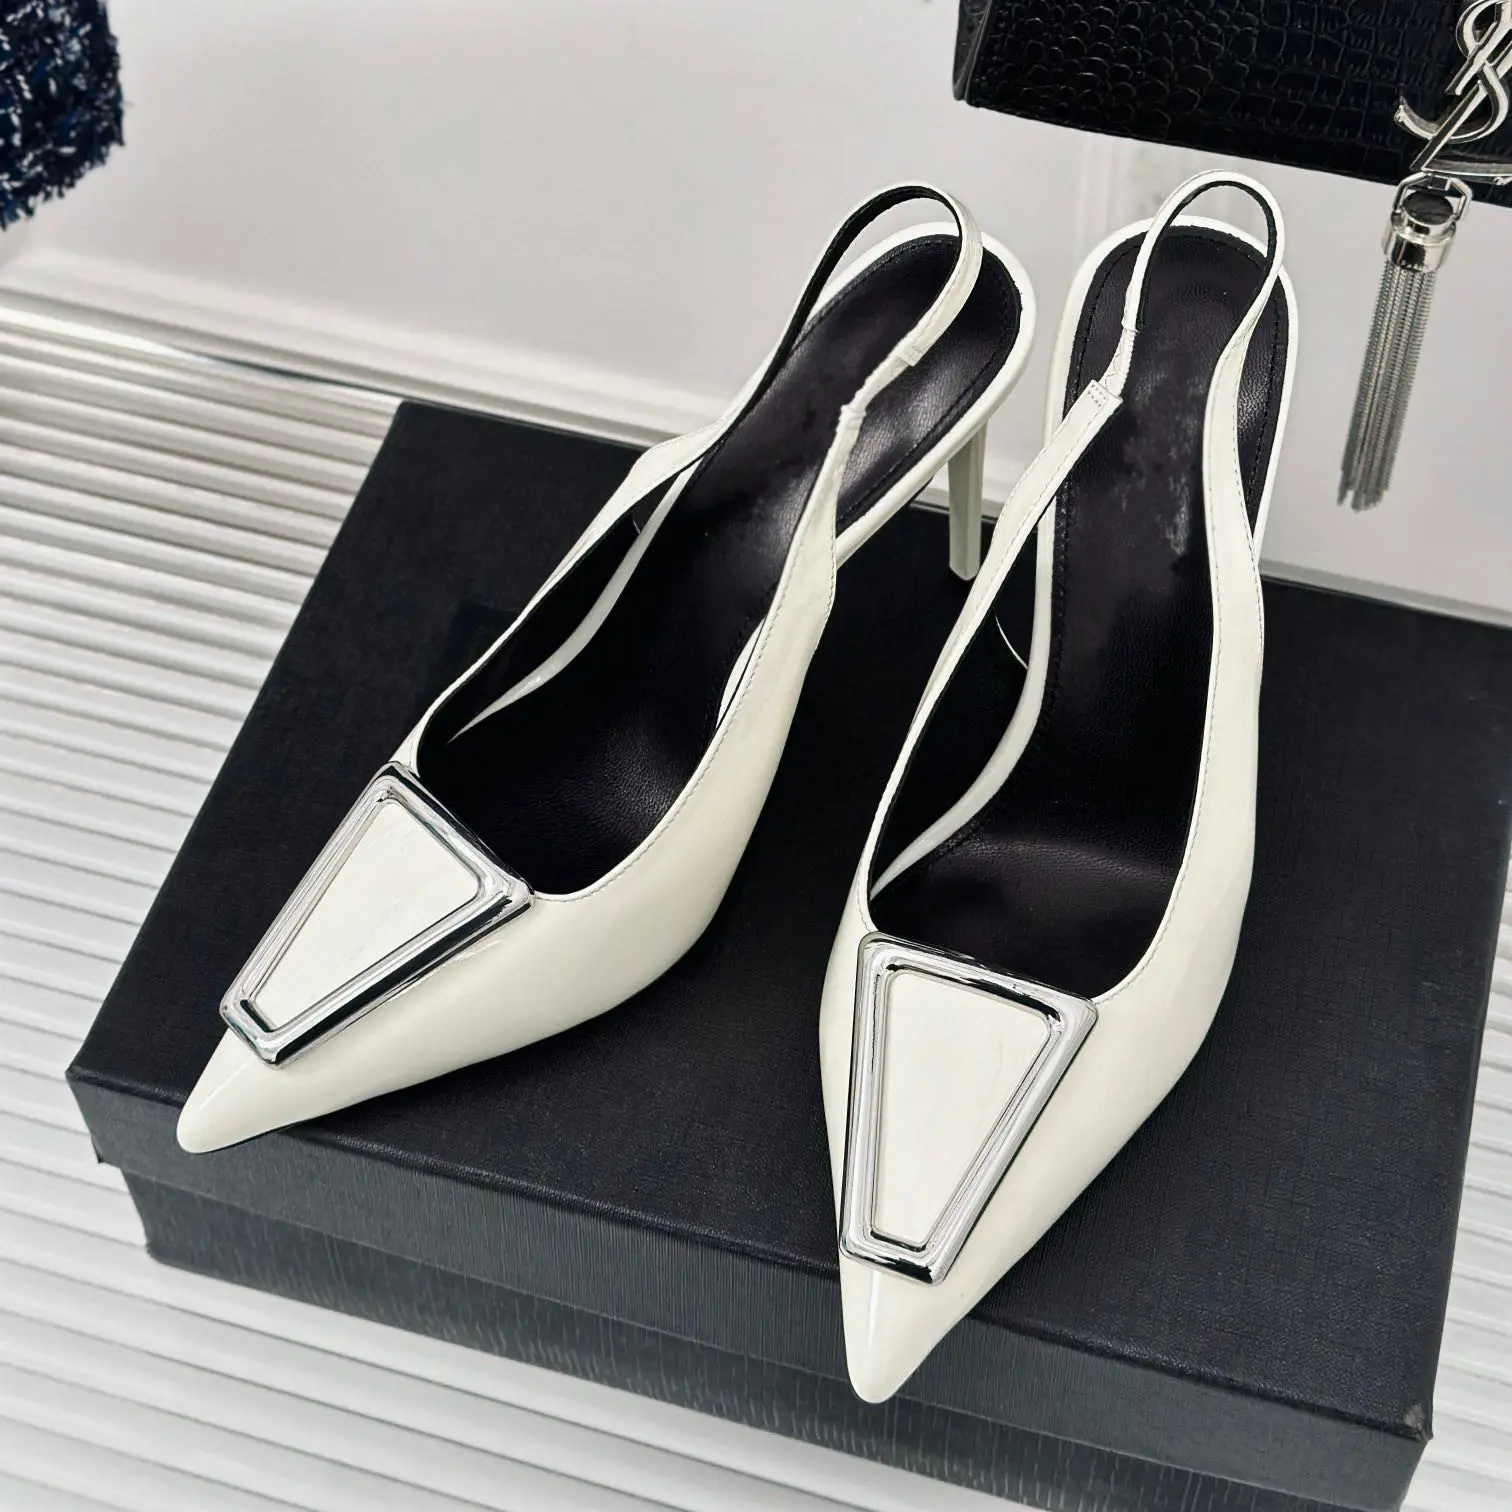 Casual Designer Fashion Women Shoes Sexy Lady White Patent Leather Strappy Pointy Toe High Heels Sandals Zapatos Mujer Sandals casual designer fashion women shoes sexy lady white patent leather strappy pointy toe high heels sandals zapatos mujer sandals